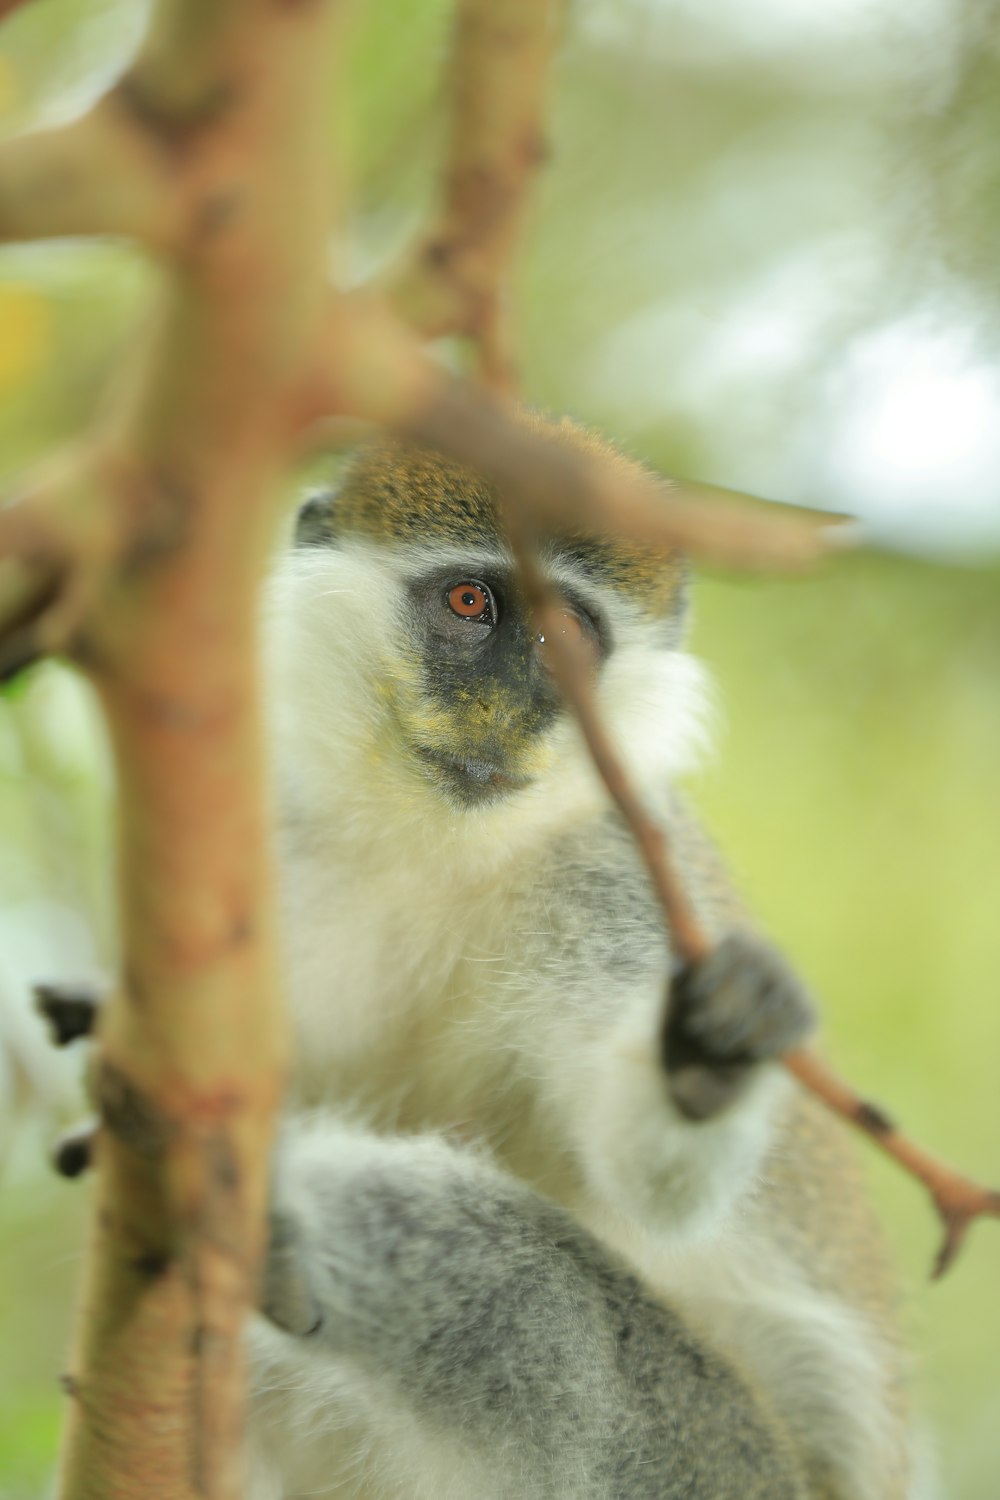 white and brown monkey on brown tree branch during daytime